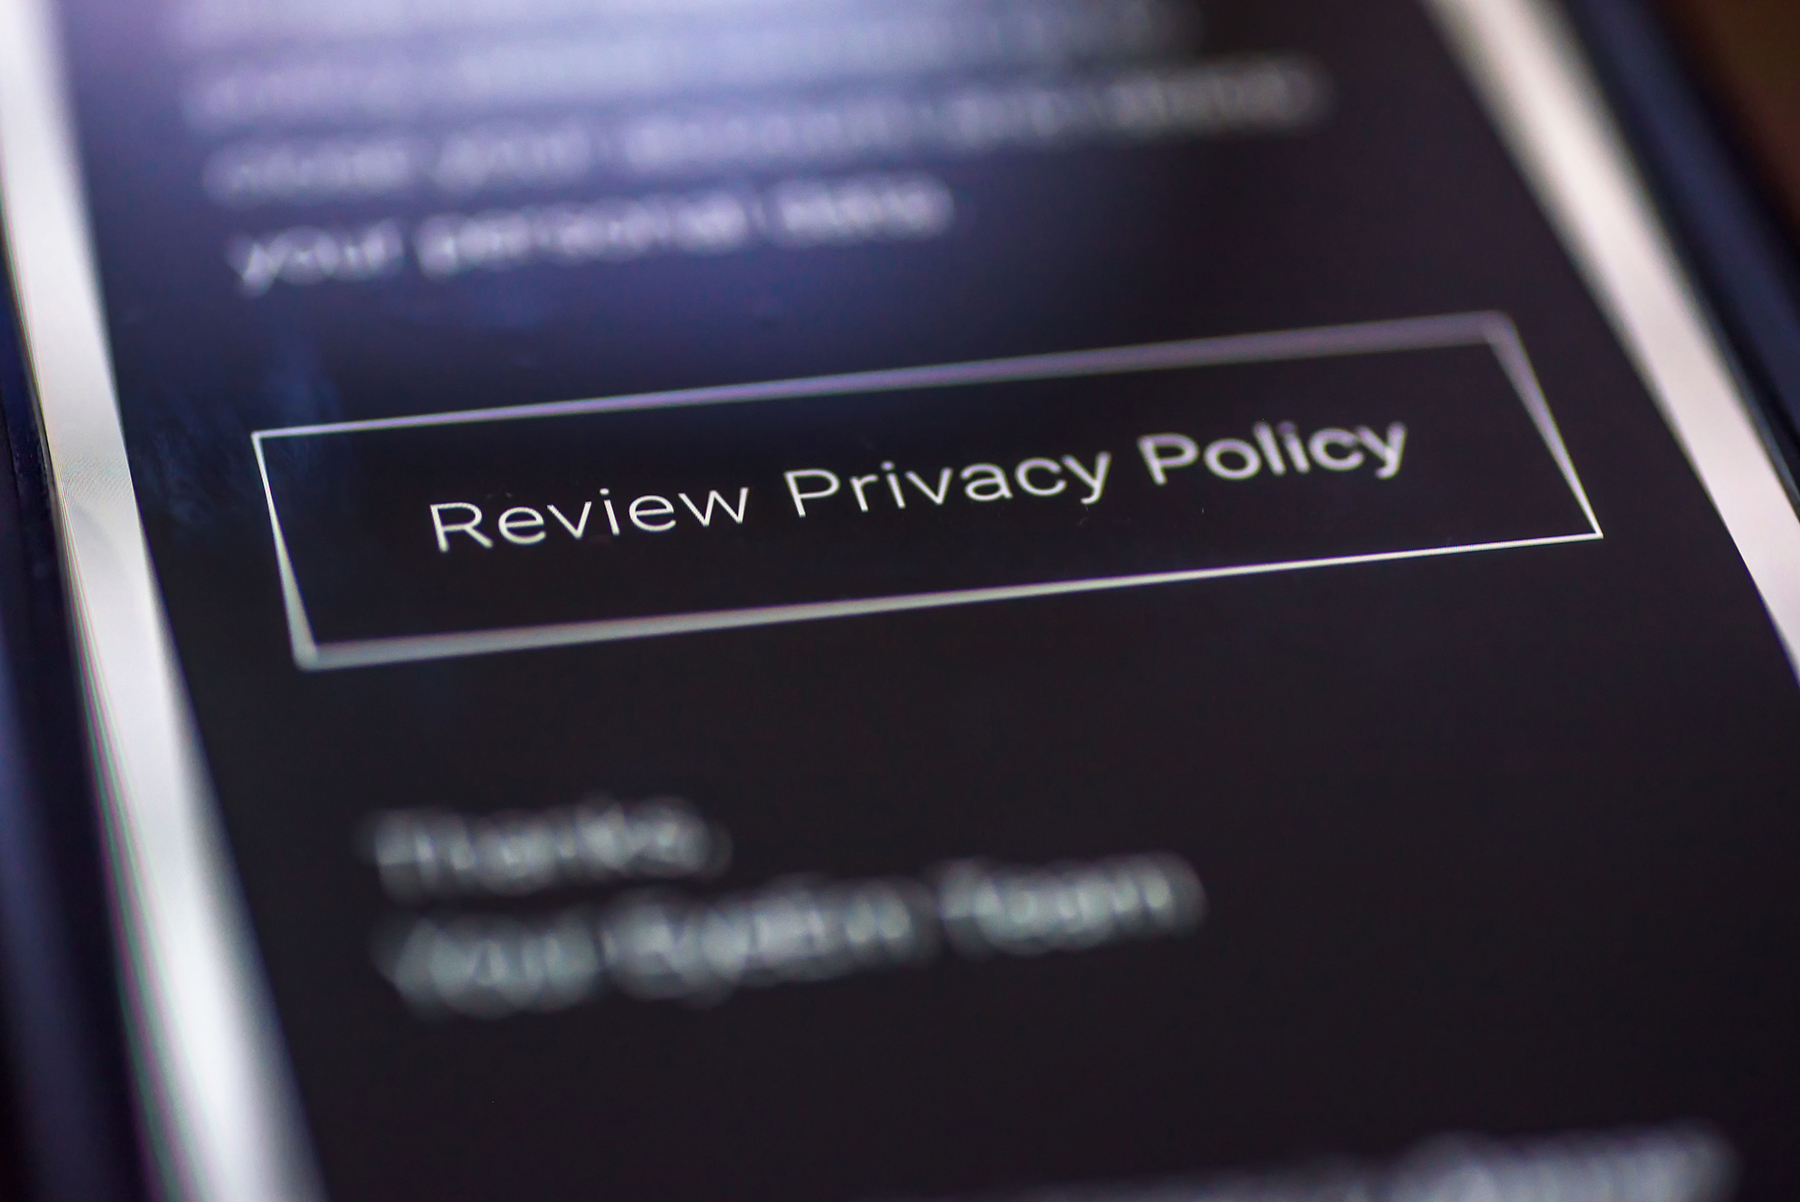 General Data Protection Regulation - GDPR - closeup smartphone message with button Review Privacy Policy.